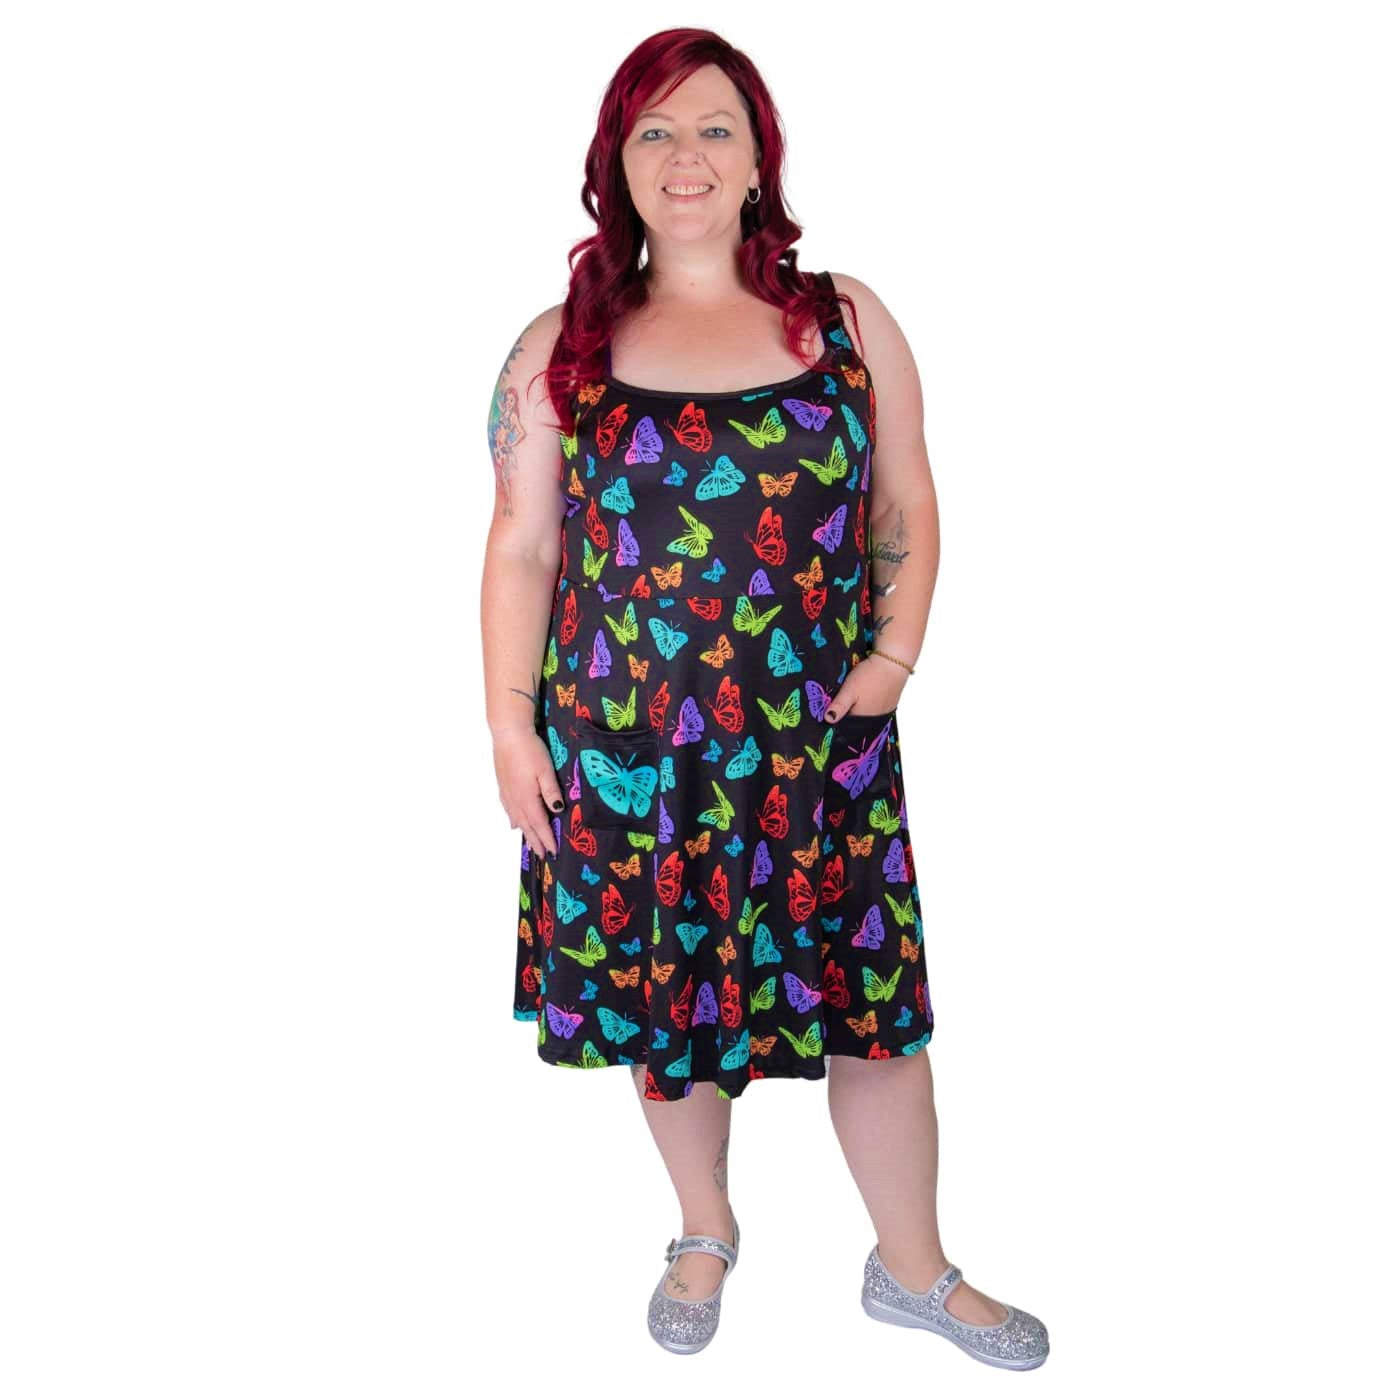 Kaleidoscope Pinafore by RainbowsAndFairies.com.au (Monarch Butterfly - Butterflies - Dress With Pockets - Pinny - Rainbow - Vintage Inspired - Kitsch) - SKU: CL_PFORE_KSCOP_ORG - Pic-01